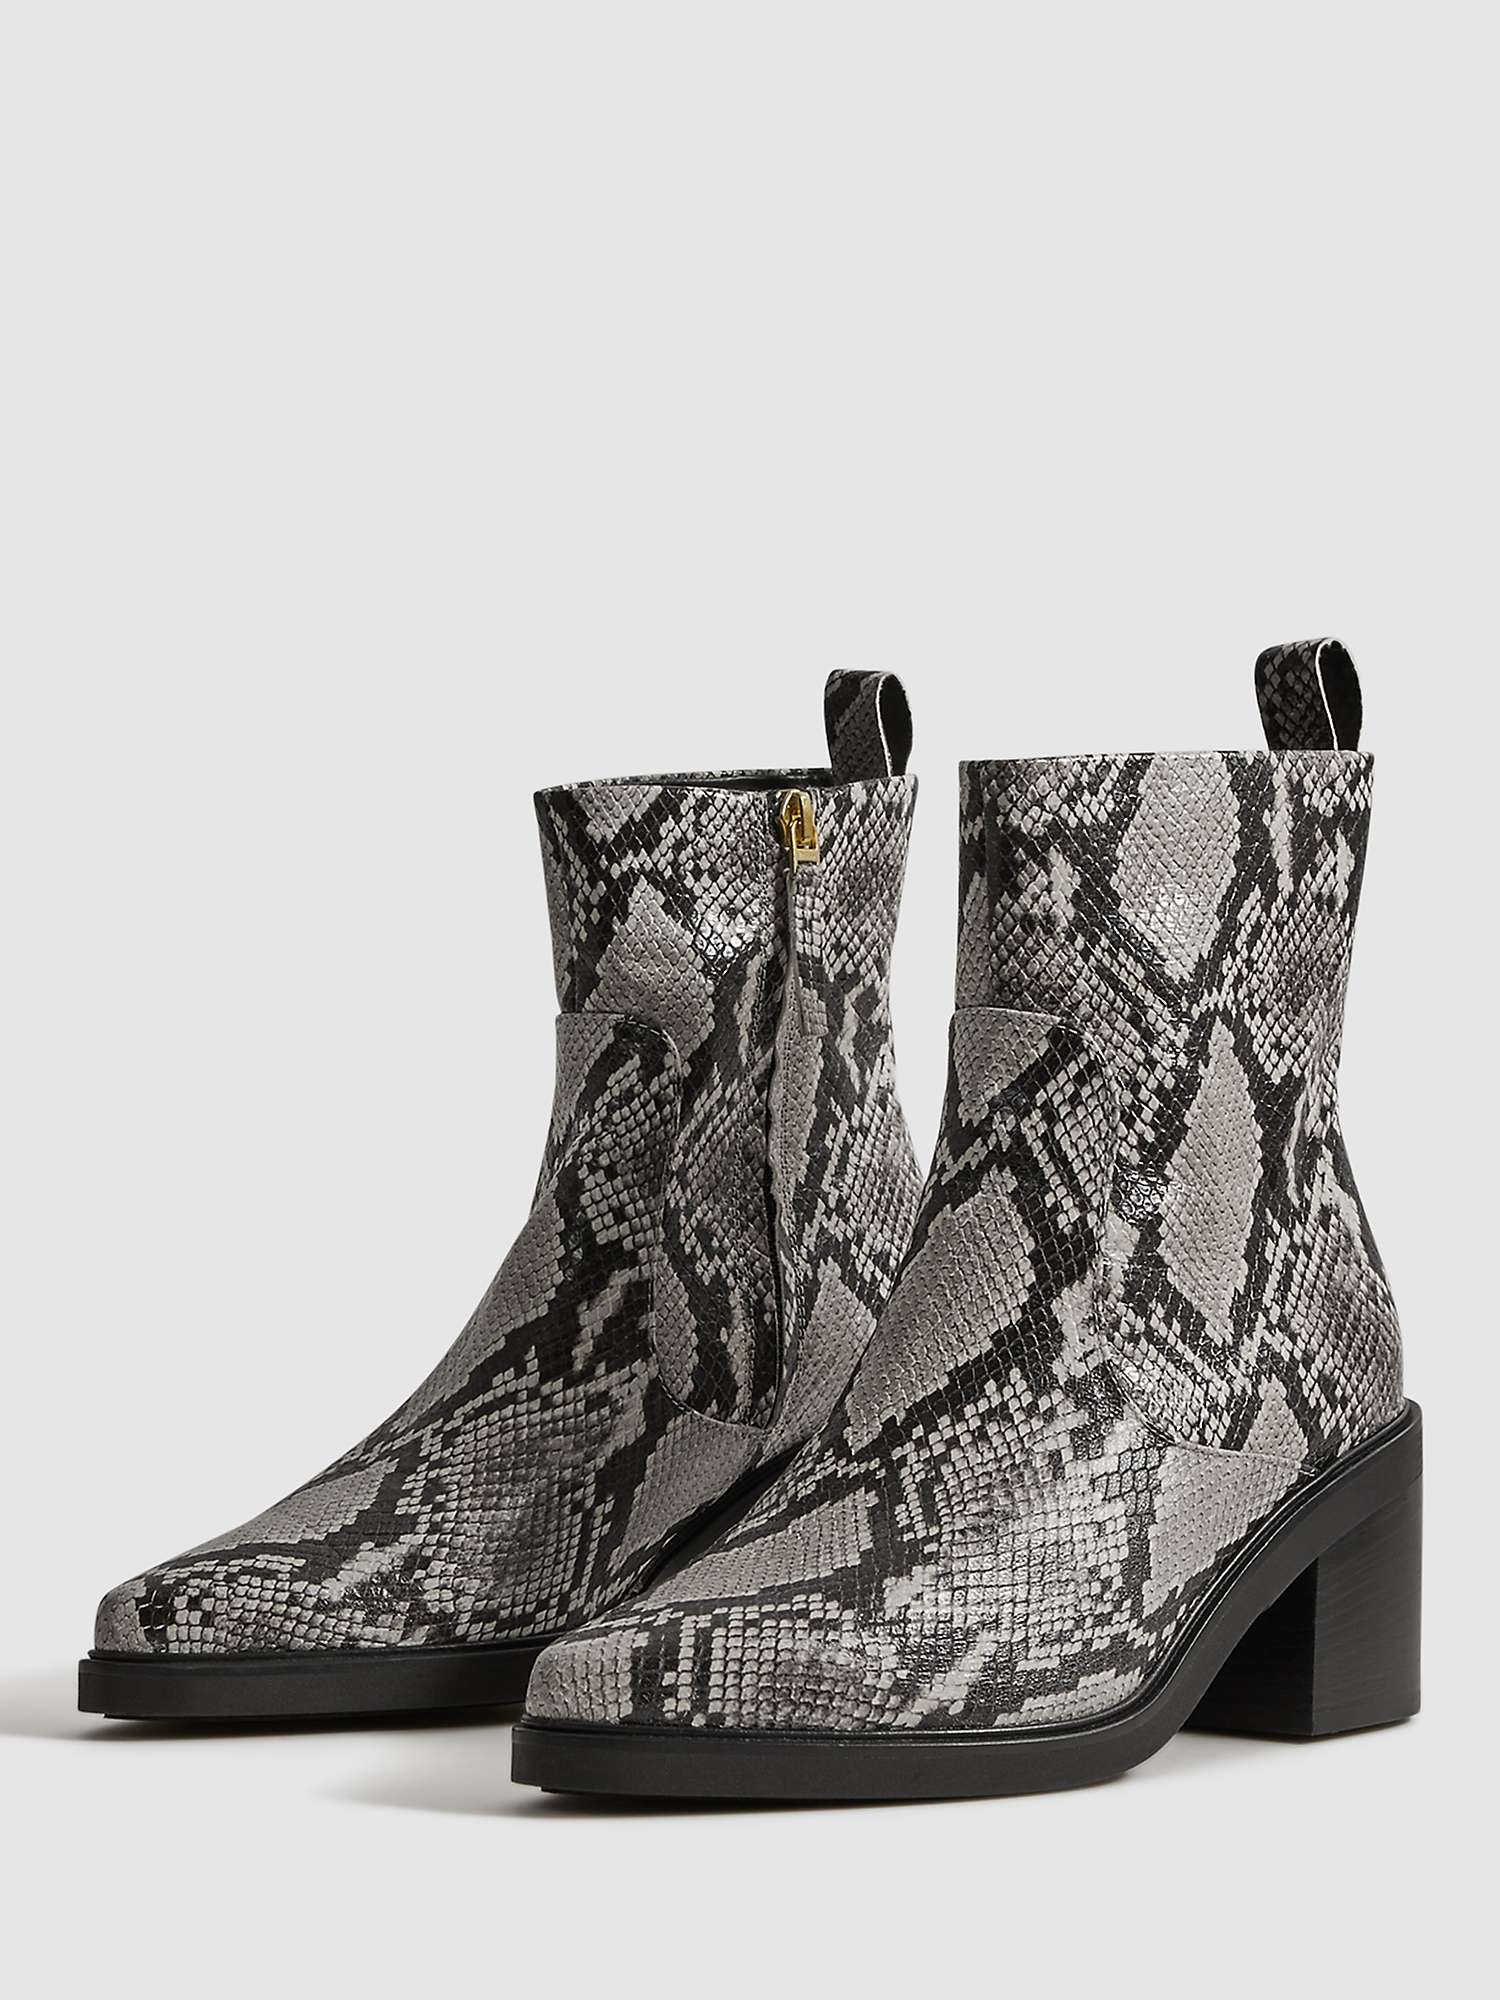 Buy Reiss Sienna Snake Print Leather Ankle Boots, Multi Online at johnlewis.com